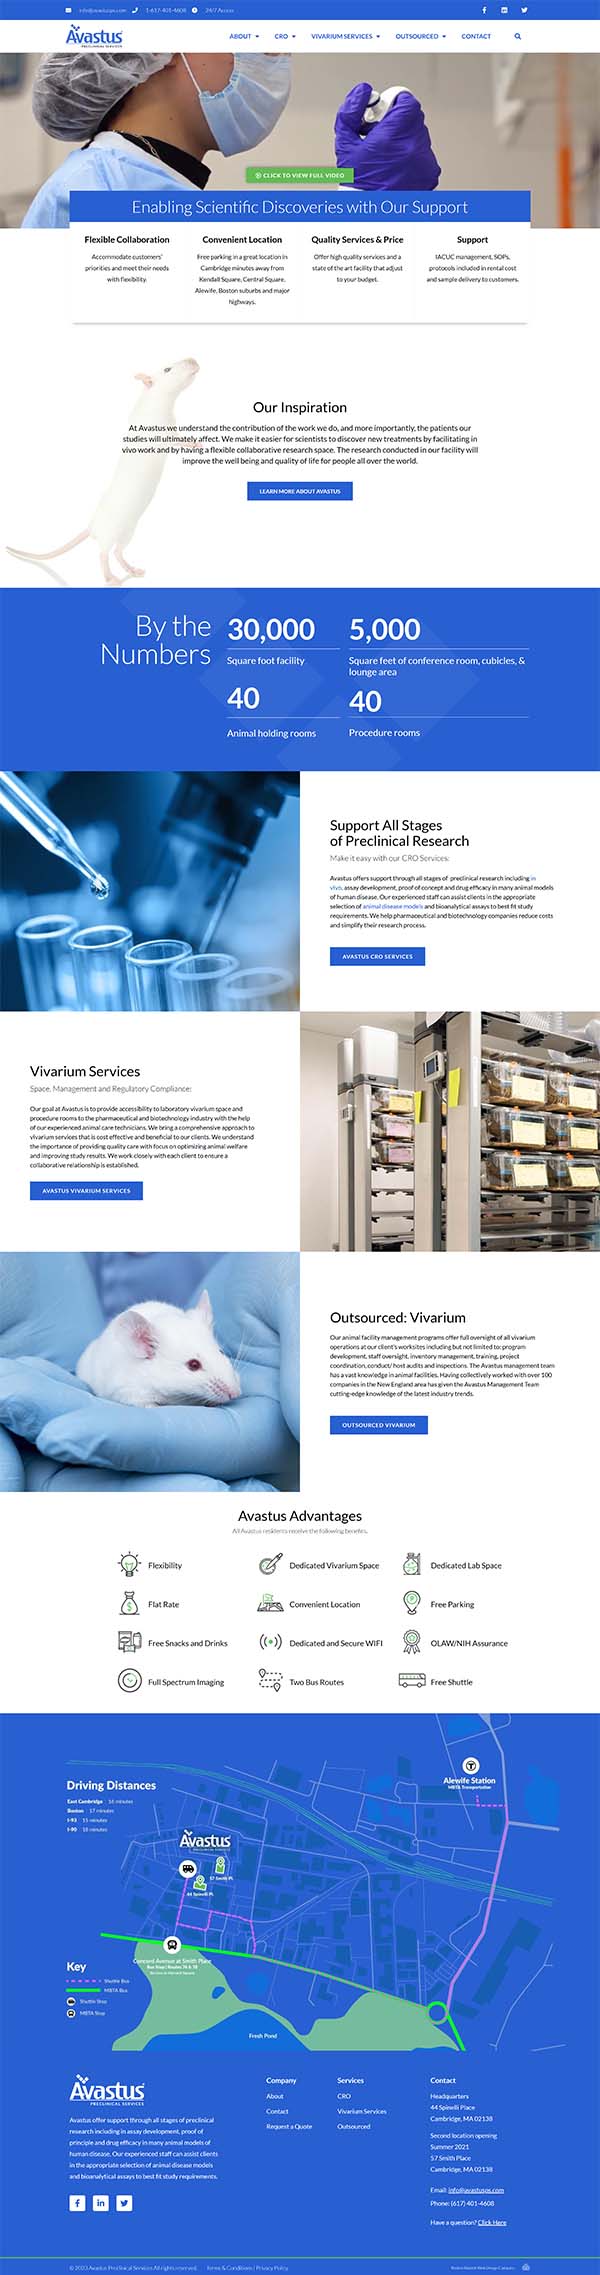 Avastus Preclinical Services - Biomedical Website Design Scroll example